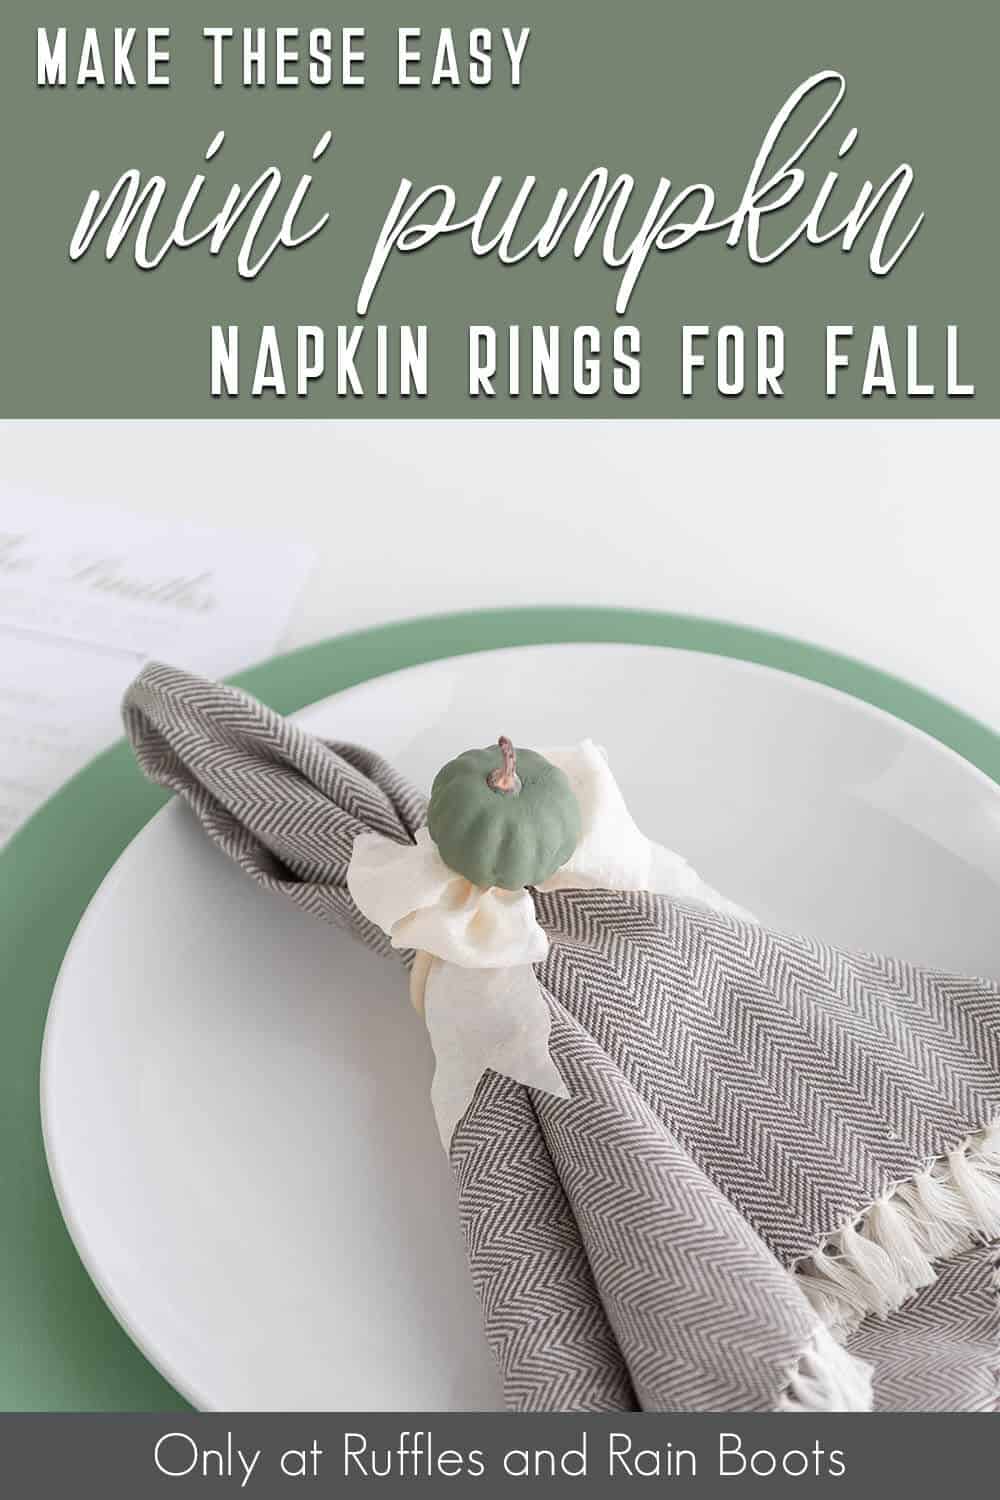 diy fall pumpkin napkin rings with text which reads make these easy mini pumpkin napkin rings for fall